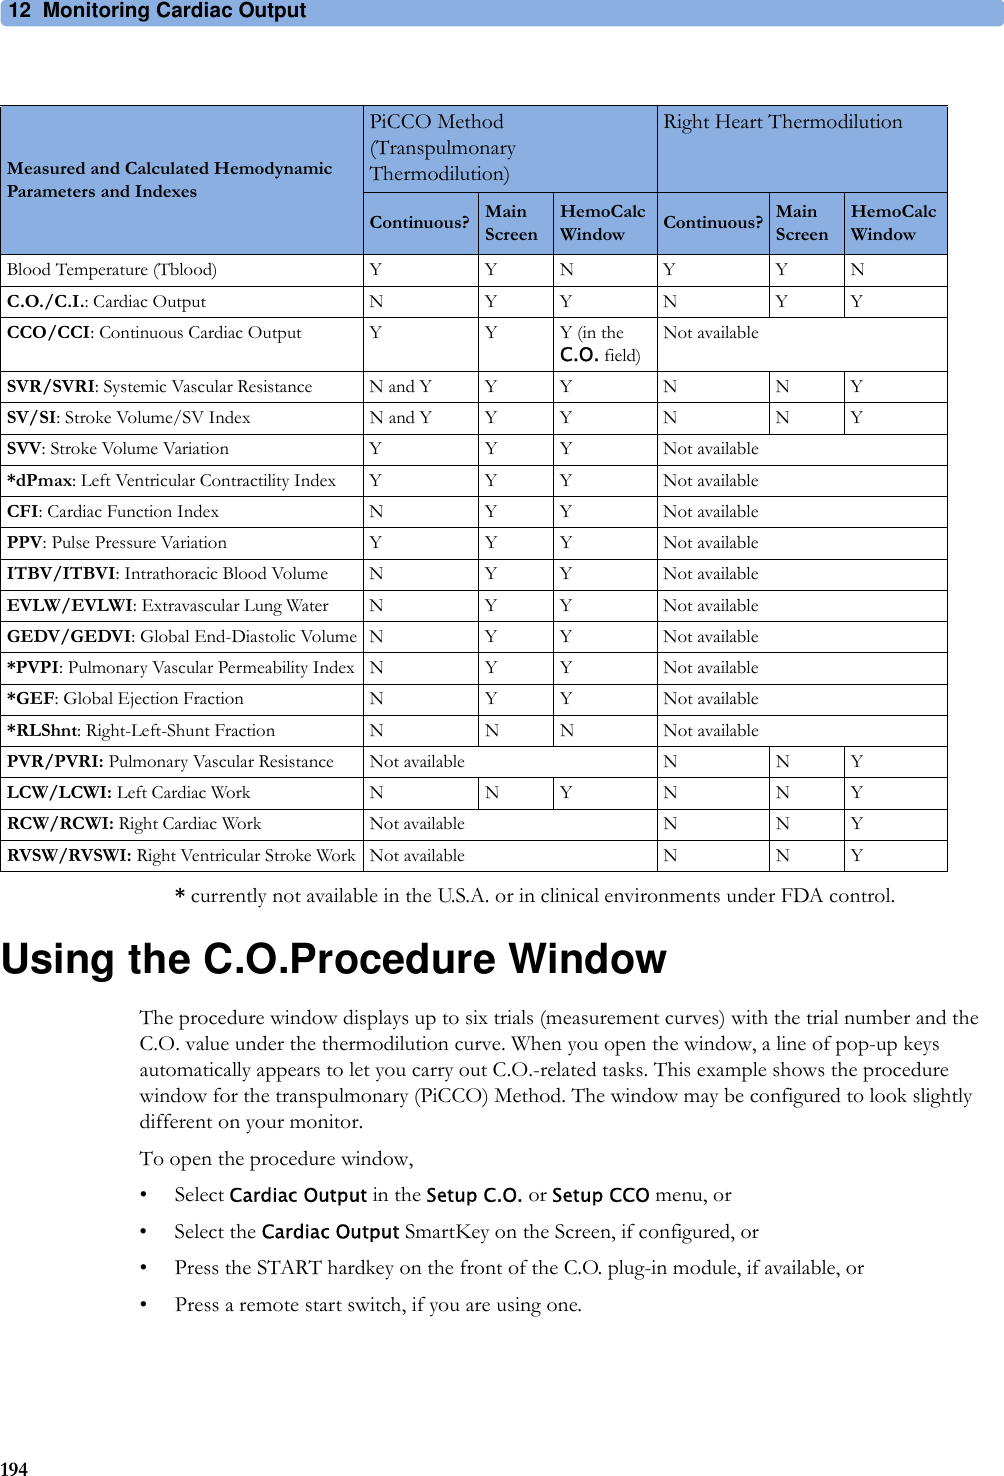 12 Monitoring Cardiac Output194* currently not available in the U.S.A. or in clinical environments under FDA control.Using the C.O.Procedure WindowThe procedure window displays up to six trials (measurement curves) with the trial number and the C.O. value under the thermodilution curve. When you open the window, a line of pop-up keys automatically appears to let you carry out C.O.-related tasks. This example shows the procedure window for the transpulmonary (PiCCO) Method. The window may be configured to look slightly different on your monitor.To open the procedure window,•Select Cardiac Output in the Setup C.O. or Setup CCO menu, or• Select the Cardiac Output SmartKey on the Screen, if configured, or• Press the START hardkey on the front of the C.O. plug-in module, if available, or• Press a remote start switch, if you are using one.Measured and Calculated Hemodynamic Parameters and IndexesPiCCO Method (Transpulmonary Thermodilution)Right Heart ThermodilutionContinuous? Main ScreenHemoCalc Window Continuous? Main ScreenHemoCalc WindowBlood Temperature (Tblood) Y Y N Y Y NC.O./C.I.: Cardiac Output N Y Y N Y YCCO/CCI: Continuous Cardiac Output Y Y Y (in the C.O. field)Not availableSVR/SVRI: Systemic Vascular Resistance N and Y Y Y N N YSV/SI: Stroke Volume/SV Index N and Y Y Y N N YSVV: Stroke Volume Variation Y Y Y Not available*dPmax: Left Ventricular Contractility Index Y Y Y Not availableCFI: Cardiac Function Index N Y Y Not availablePPV: Pulse Pressure Variation Y Y Y Not availableITBV/ITBVI: Intrathoracic Blood Volume N Y Y Not availableEVLW/EVLWI: Extravascular Lung Water N Y Y Not availableGEDV/GEDVI: Global End-Diastolic Volume N Y Y Not available*PVPI: Pulmonary Vascular Permeability Index N Y Y Not available*GEF: Global Ejection Fraction N Y Y Not available*RLShnt: Right-Left-Shunt Fraction N N N Not availablePVR/PVRI: Pulmonary Vascular Resistance Not available N N YLCW/LCWI: Left Cardiac Work N N Y N N YRCW/RCWI: Right Cardiac Work Not available N N YRVSW/RVSWI: Right Ventricular Stroke Work Not available N N Y